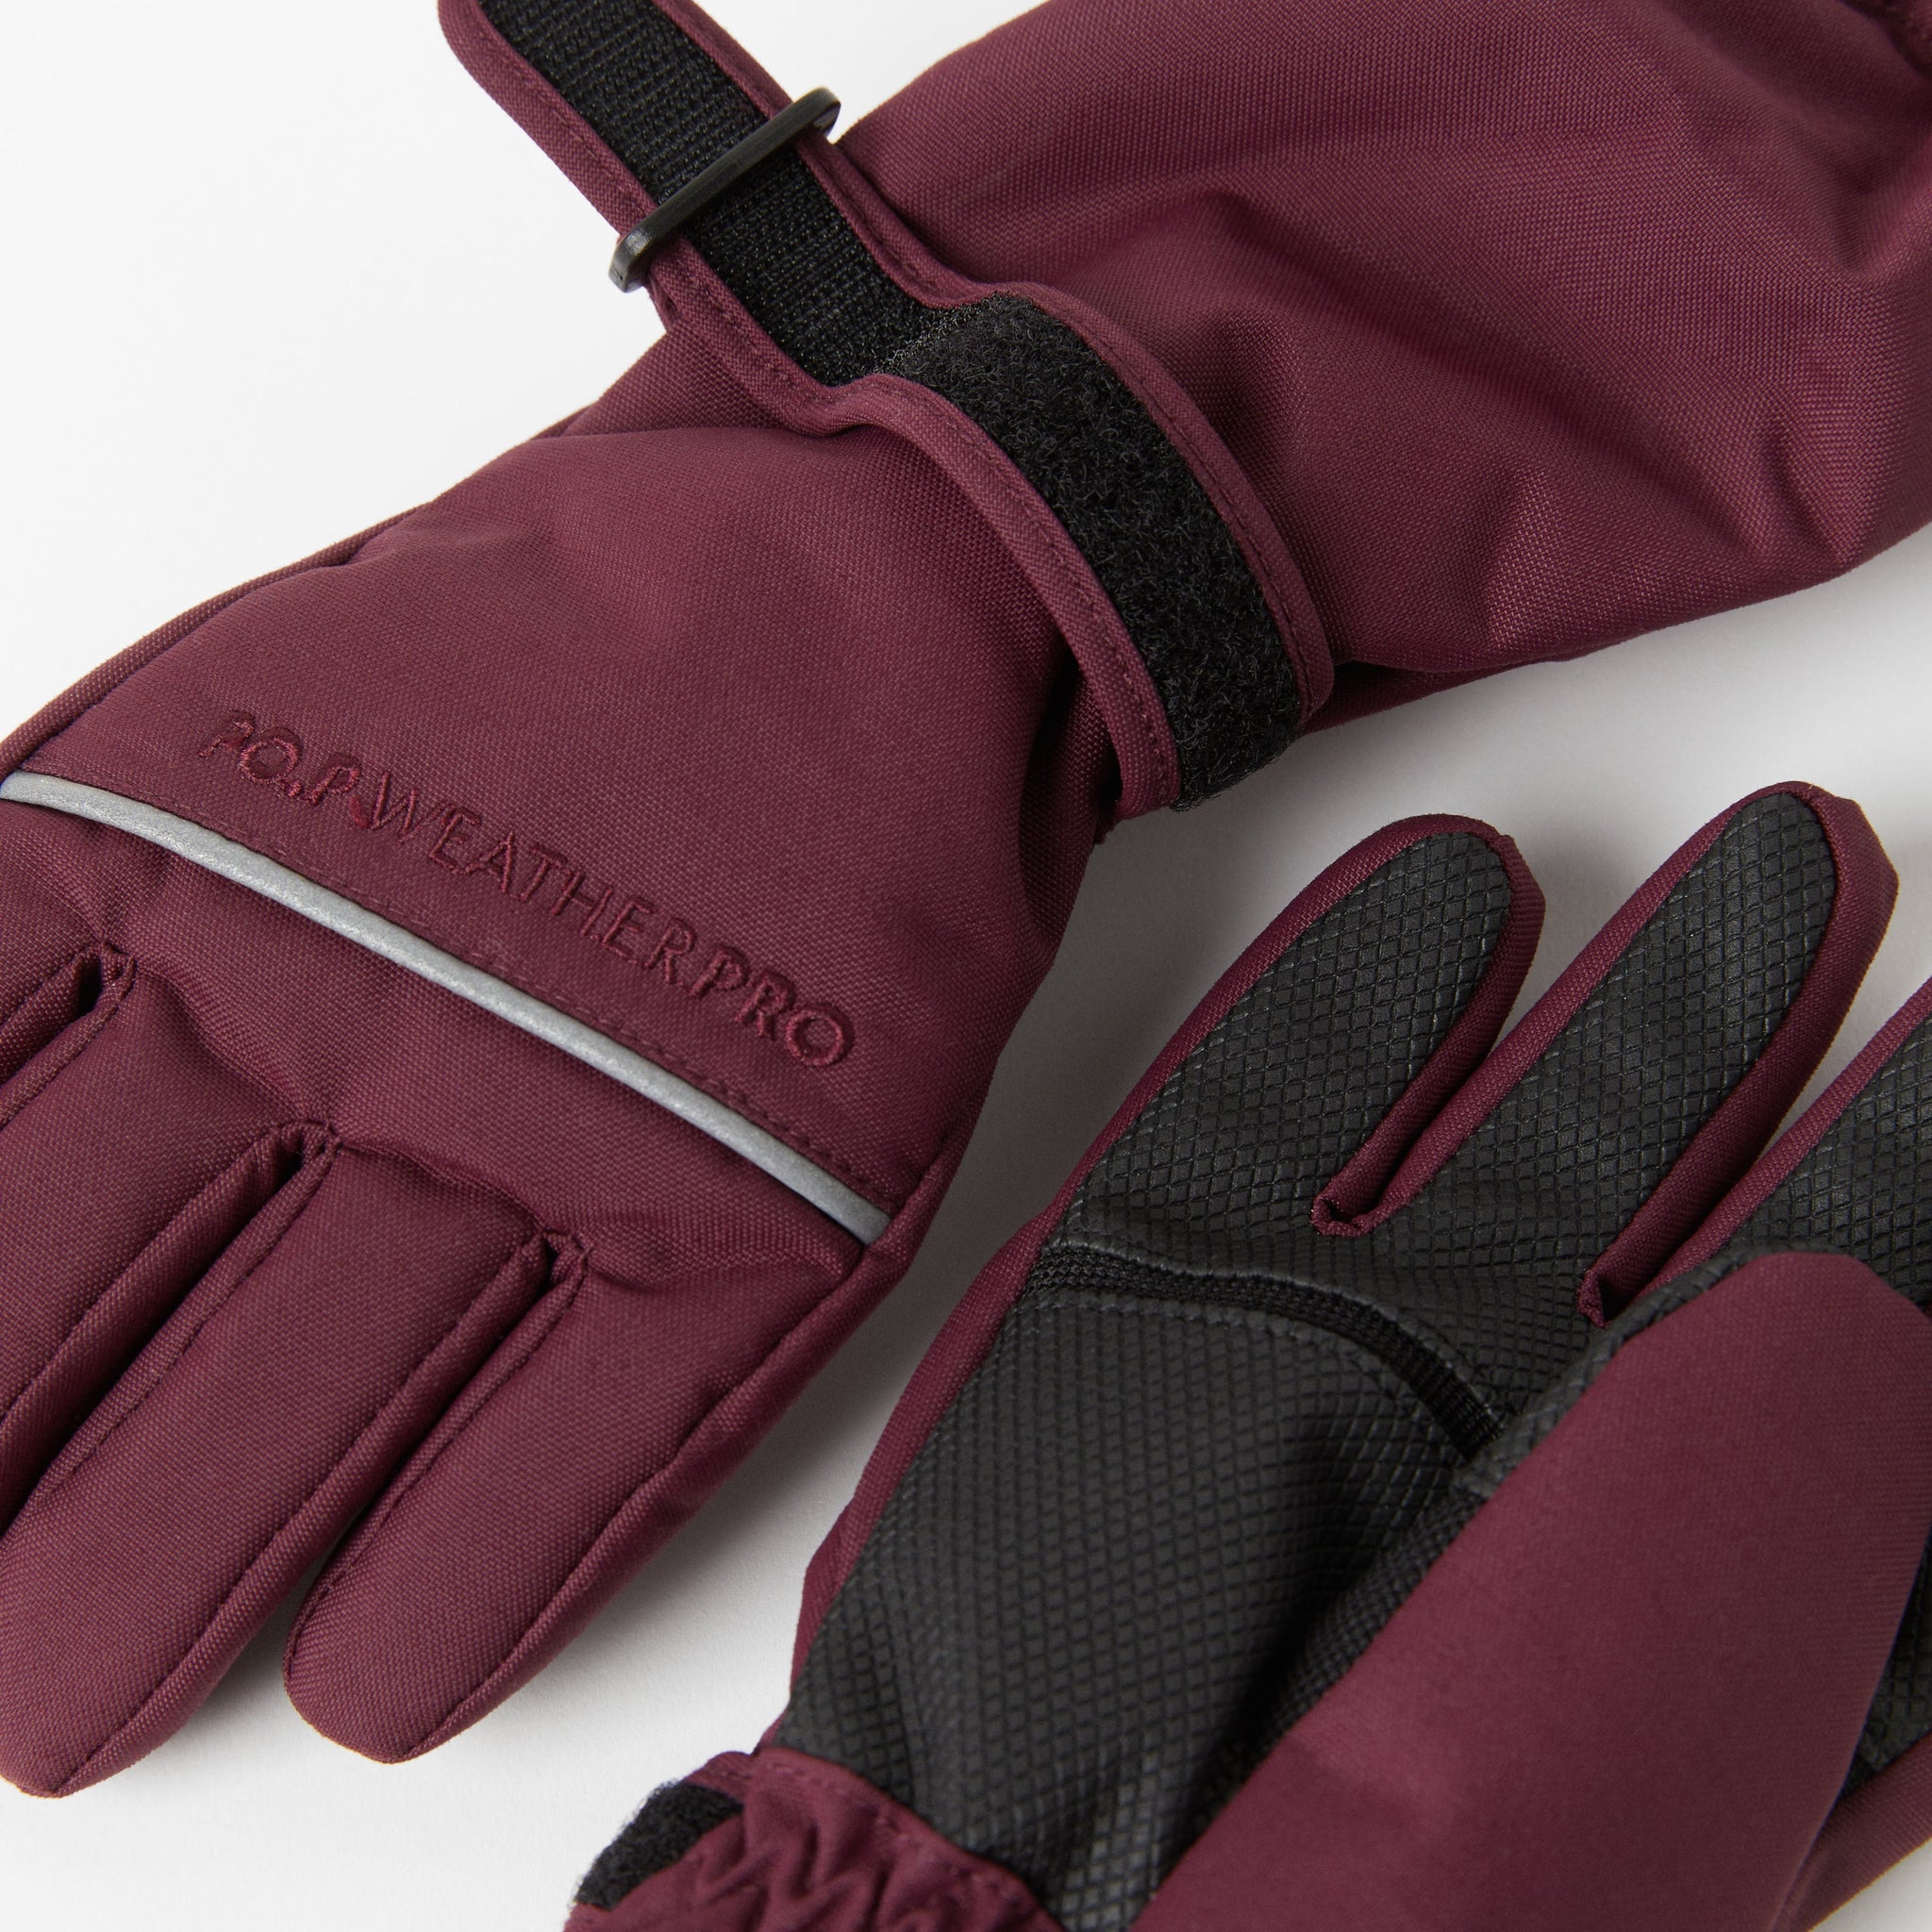 Burgundy Long Padded Kids Gloves from the Polarn O. Pyret kidswear collection. Ethically produced outerwear.